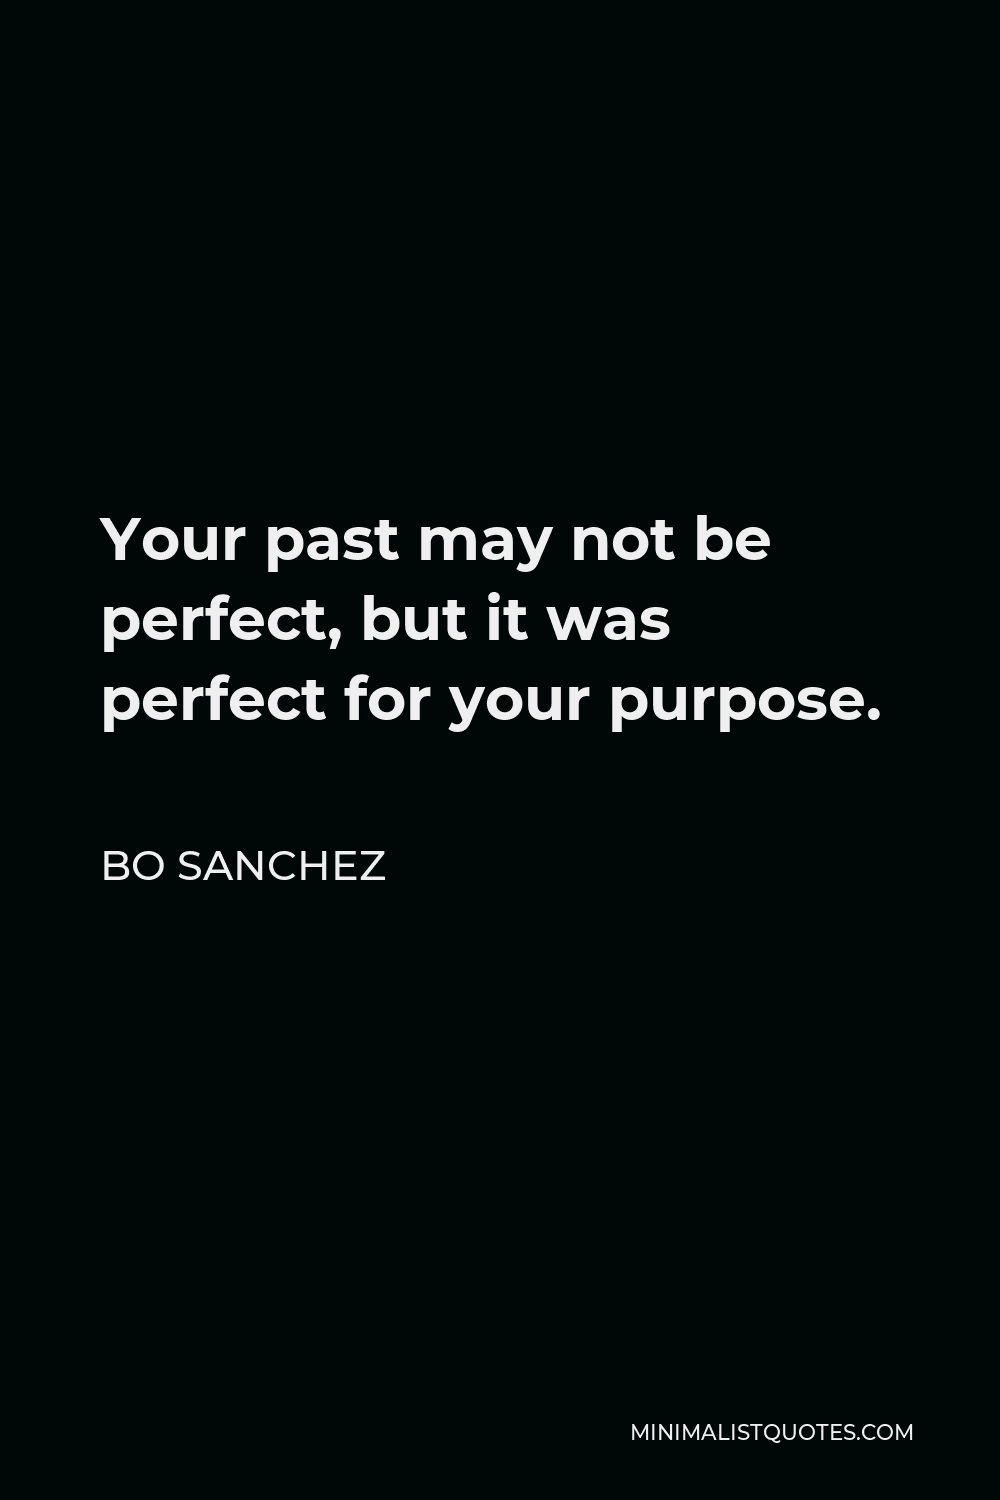 Bo Sanchez Quote - Your past may not be perfect, but it was perfect for your purpose.